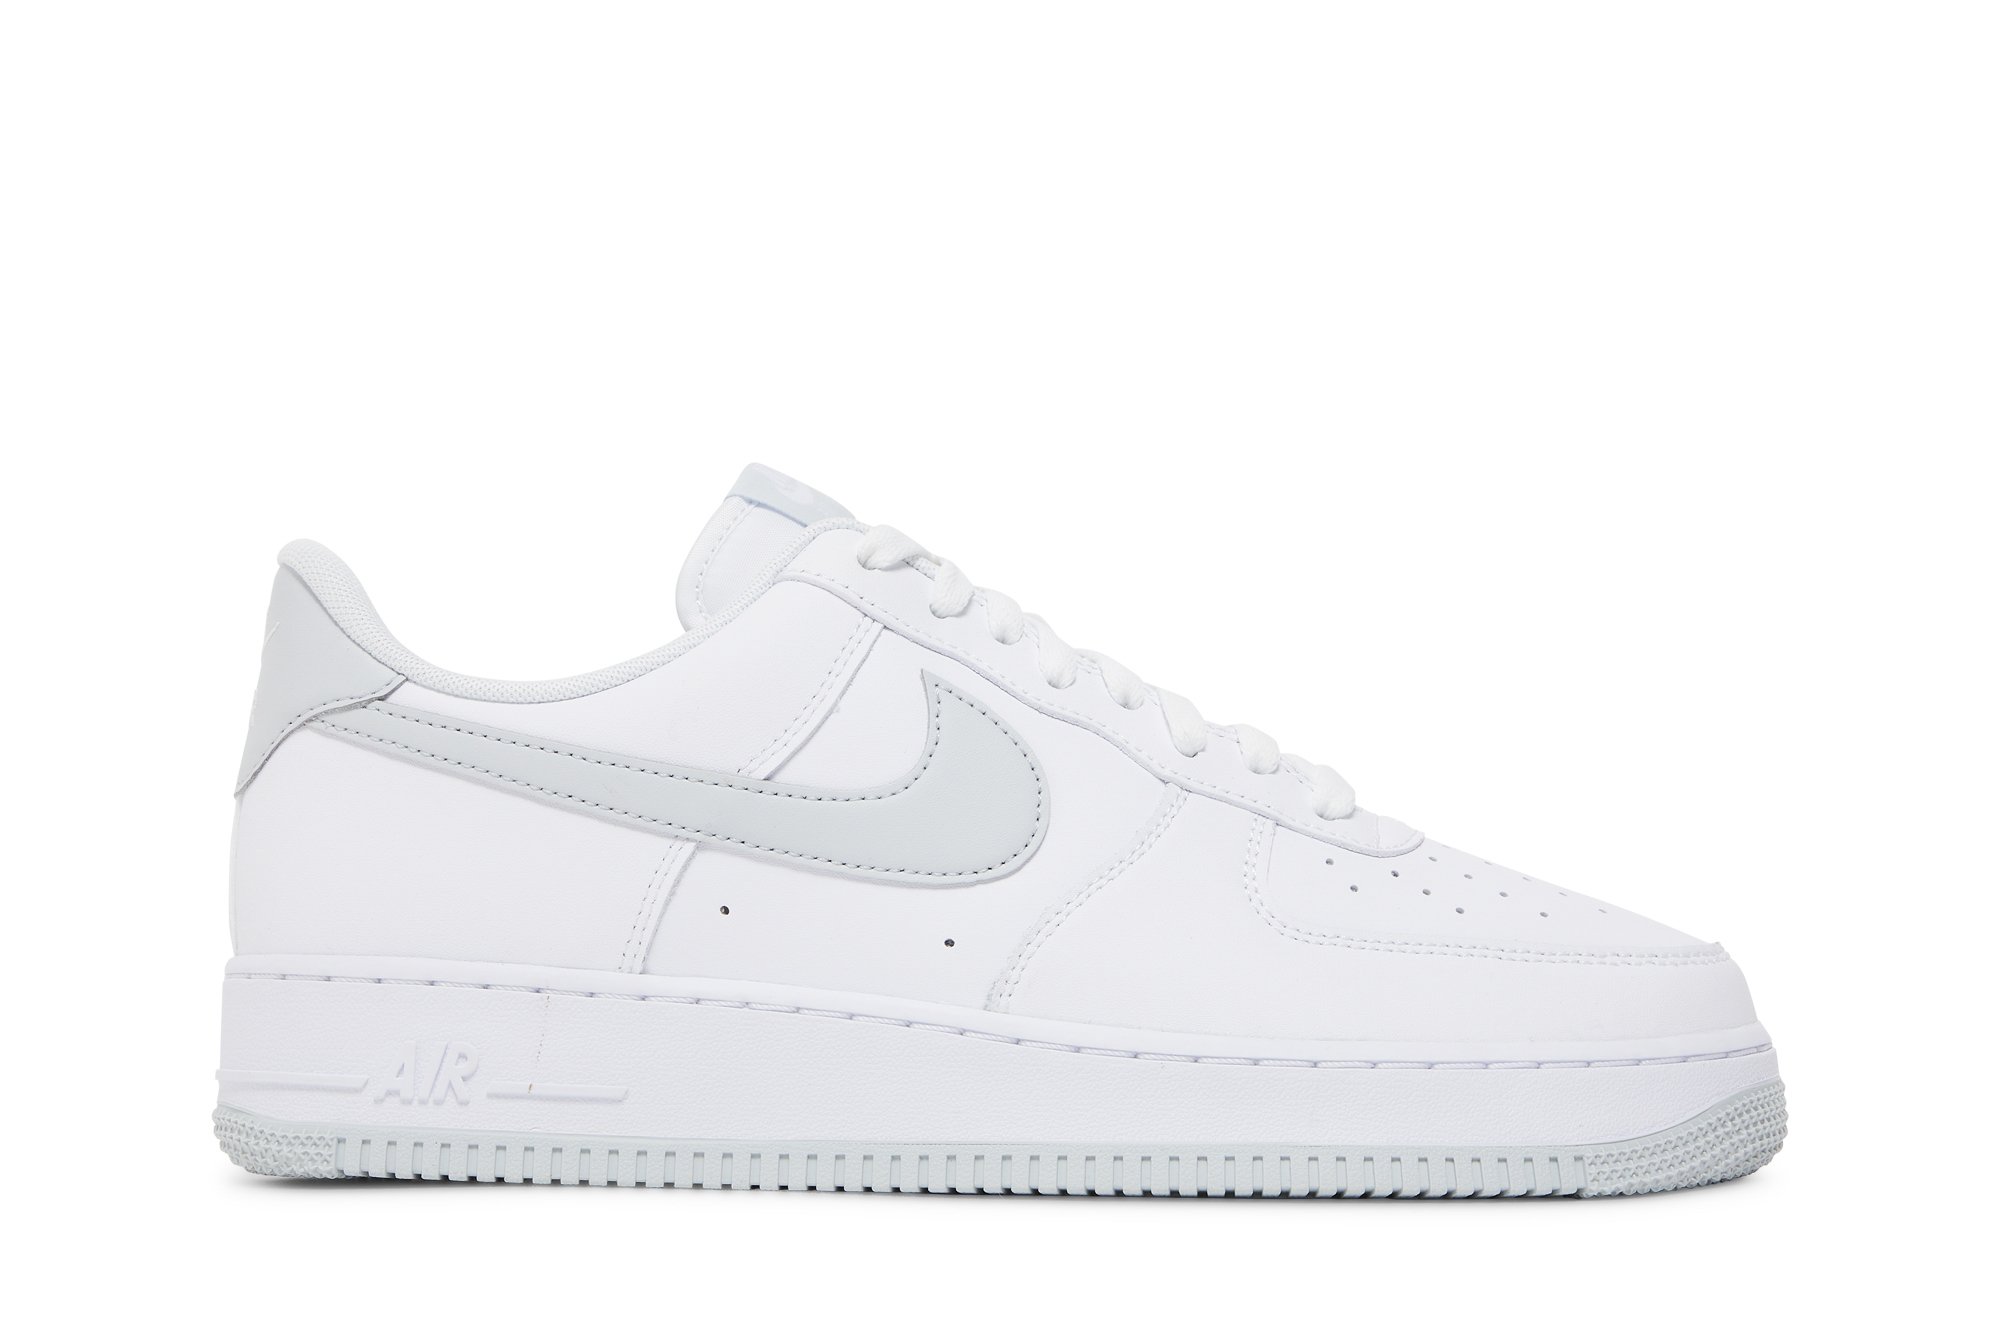 Buy Air Force 1 '07 'White Pure Platinum' - DC2911 100 | GOAT